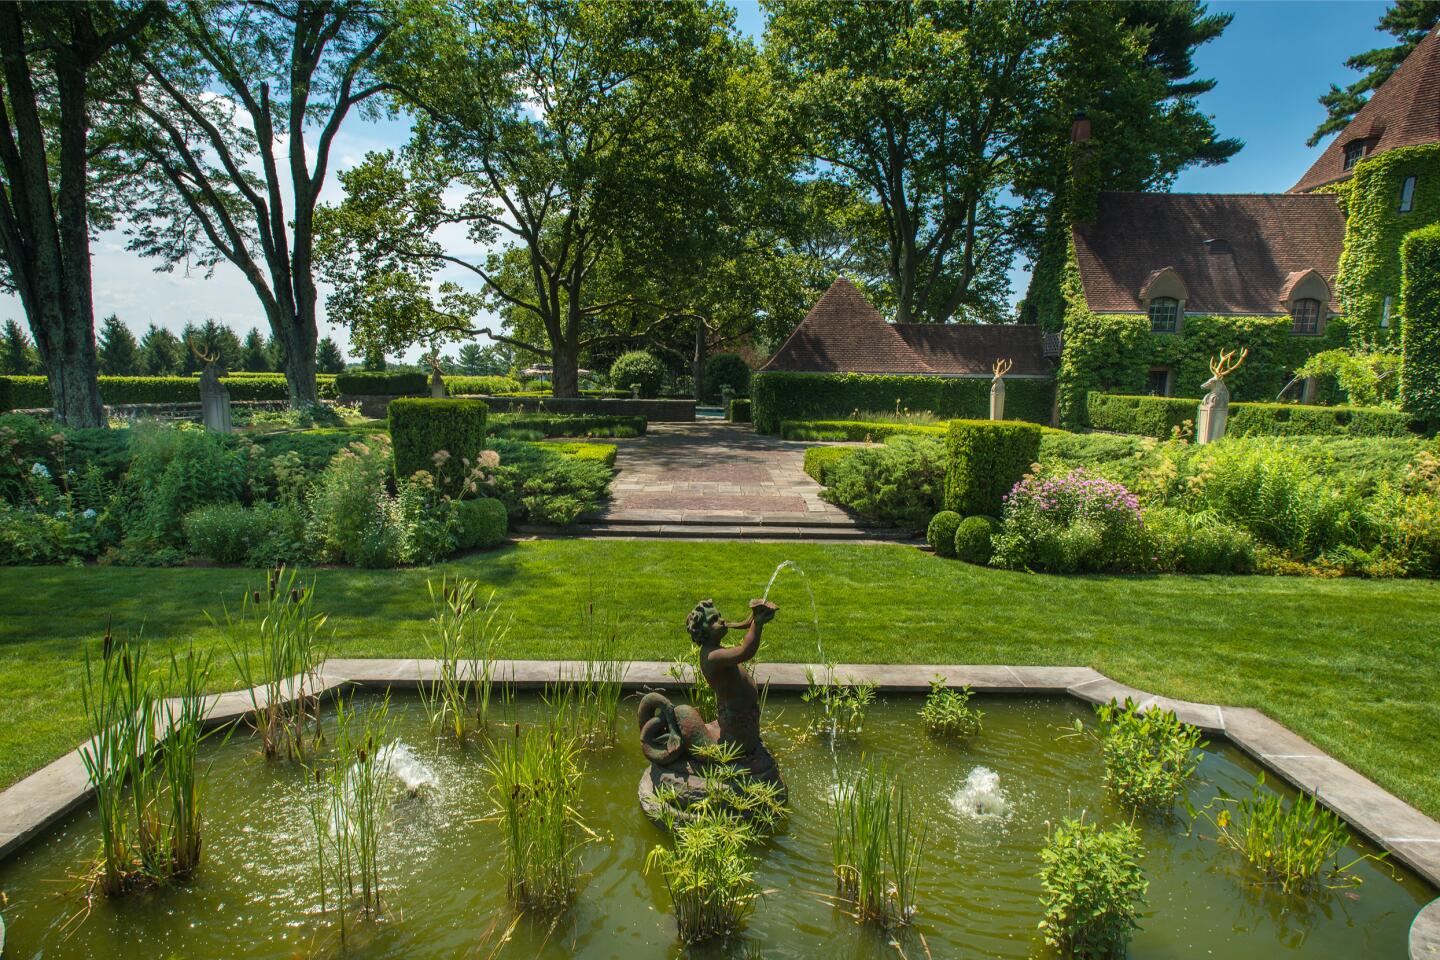 Tommy Hilfiger sells his Connecticut mansion for $47.5 million before  moving to Florida